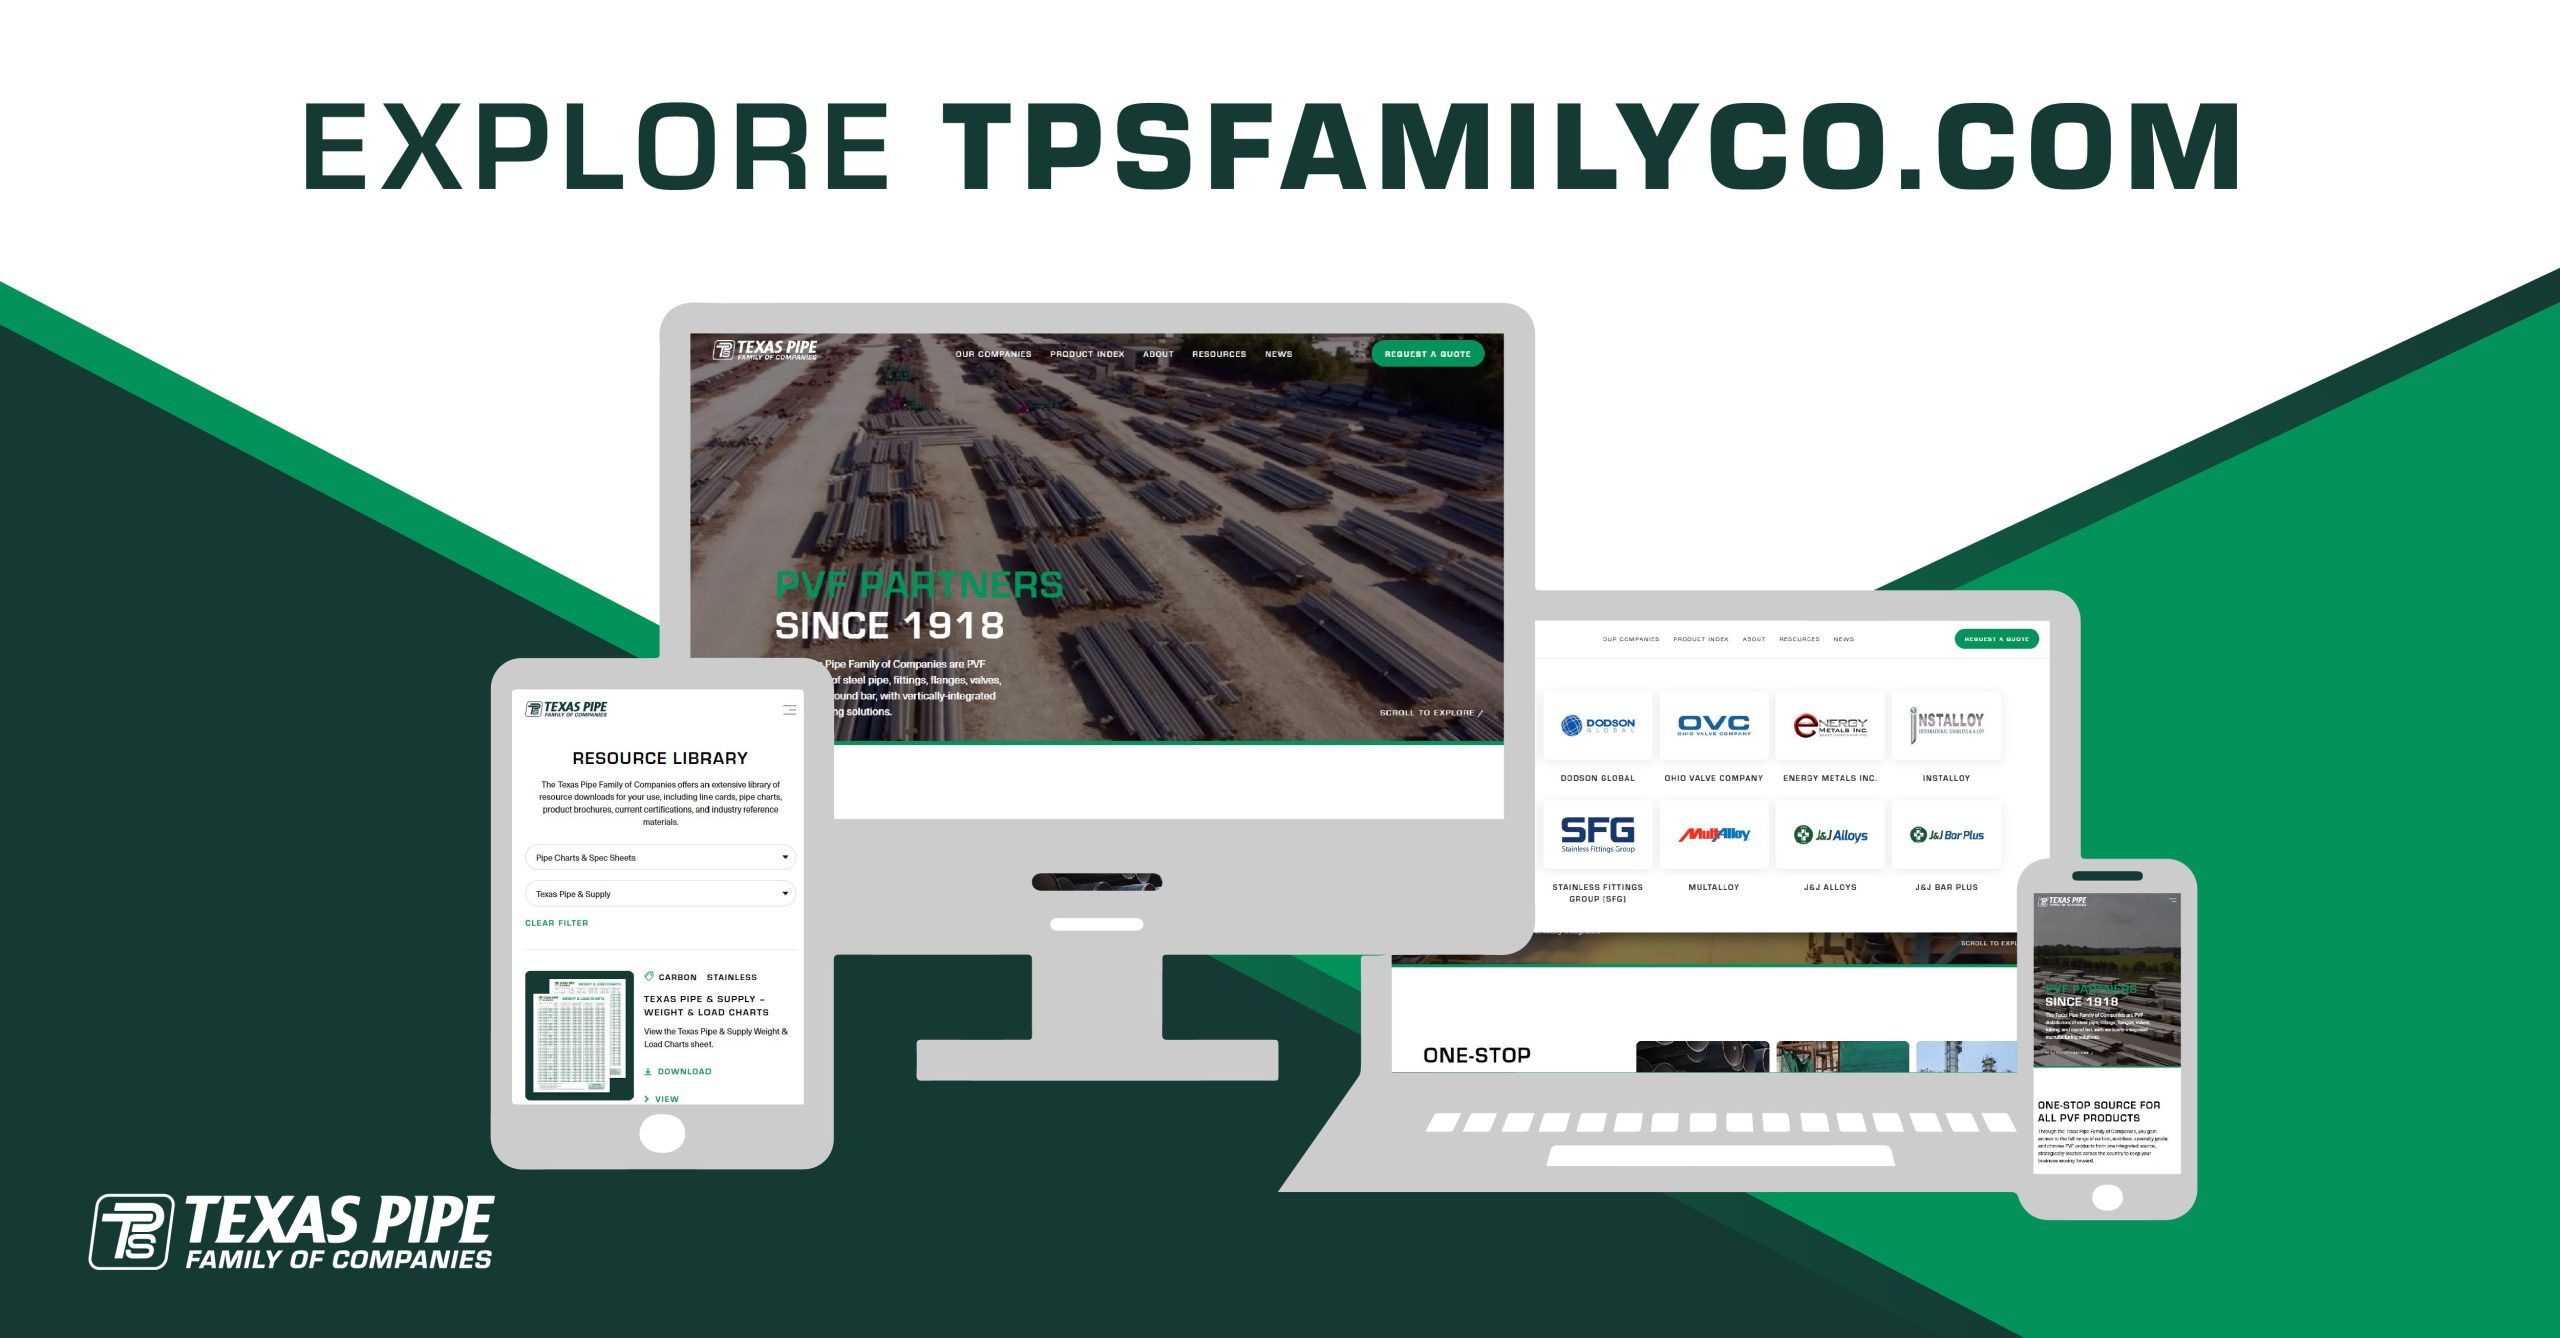 Texas Pipe Family of Companies: PVF Distributors with integrated manufacturing